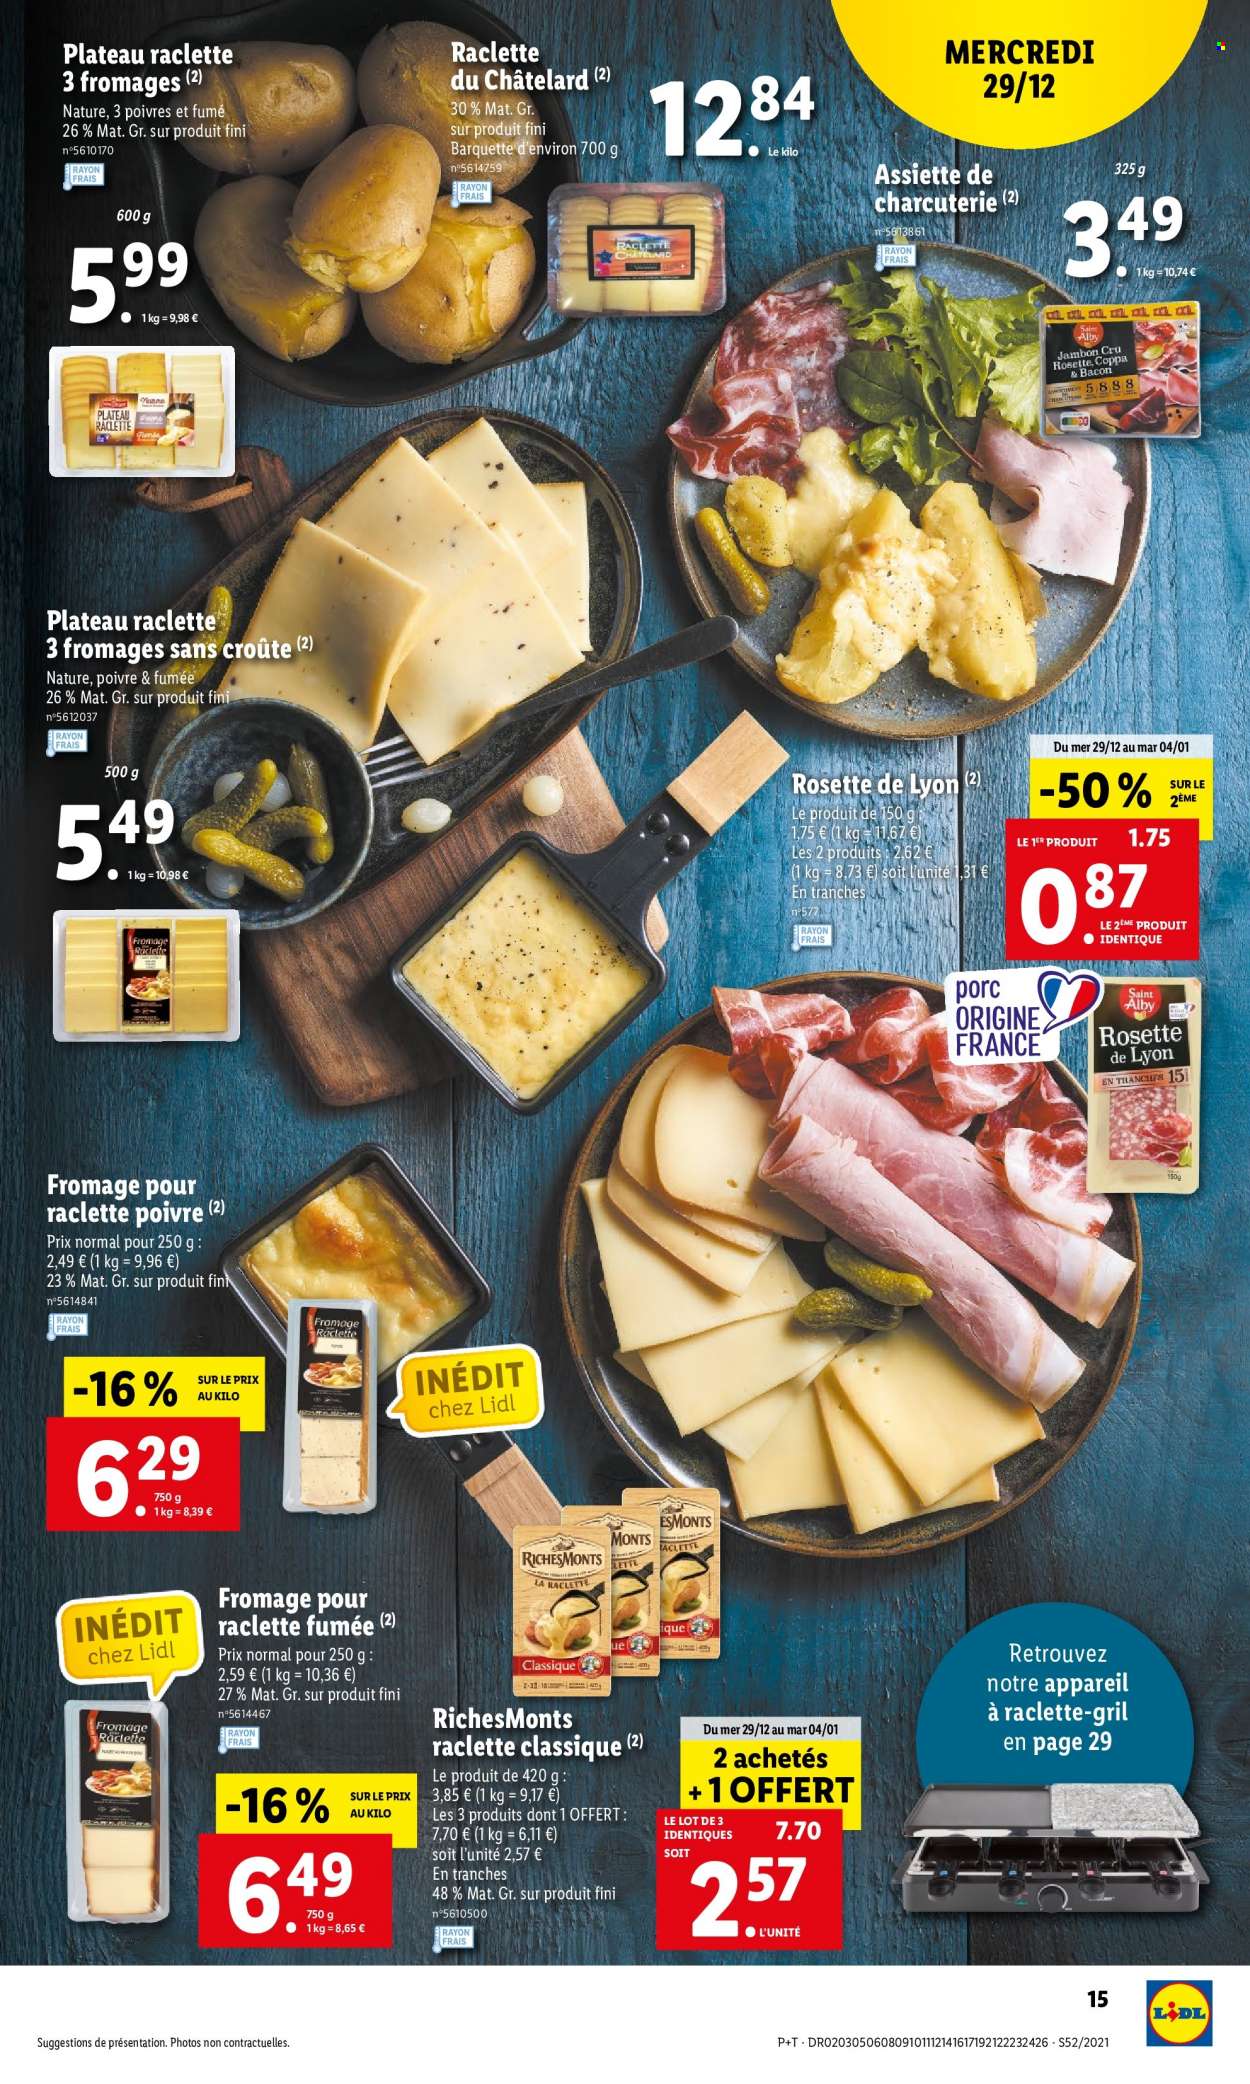 Catalogue Lidl - 29.12.2021 - 04.01.2022. Page 15.